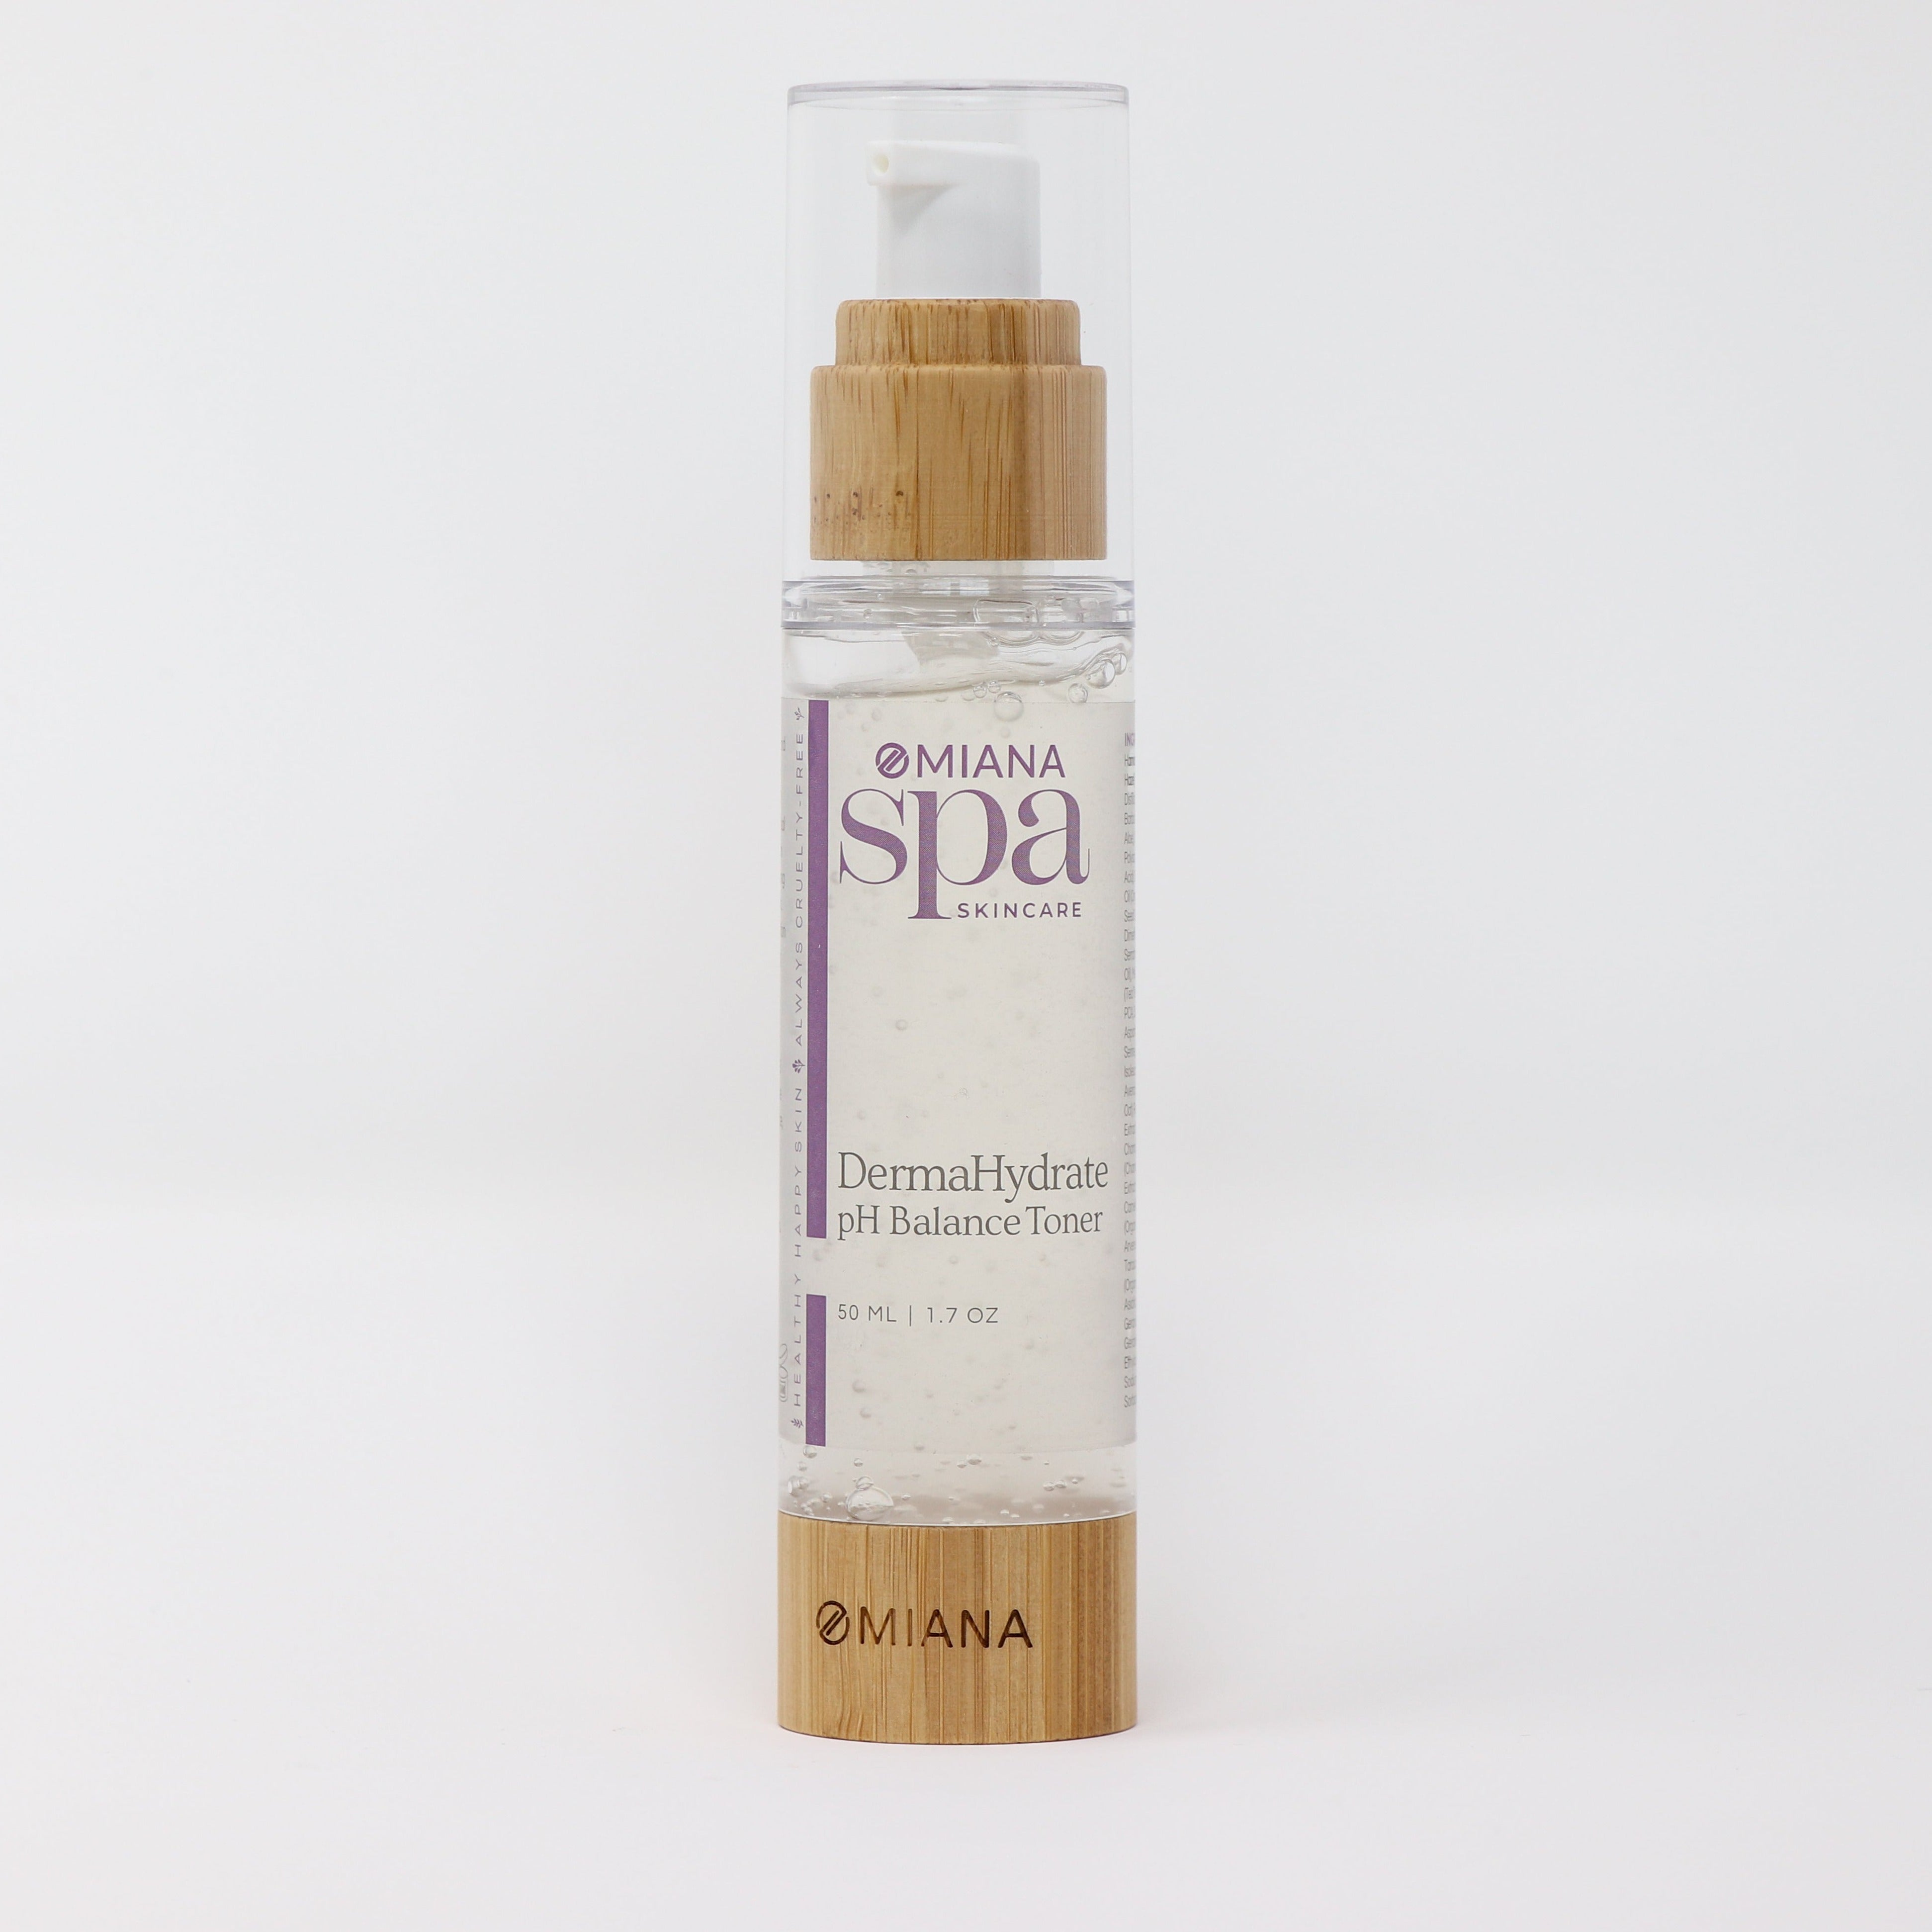 DermaHydrate pH Balance Toner - 100% Free From GMOs, Artificial Fragrances, & More by Omiana